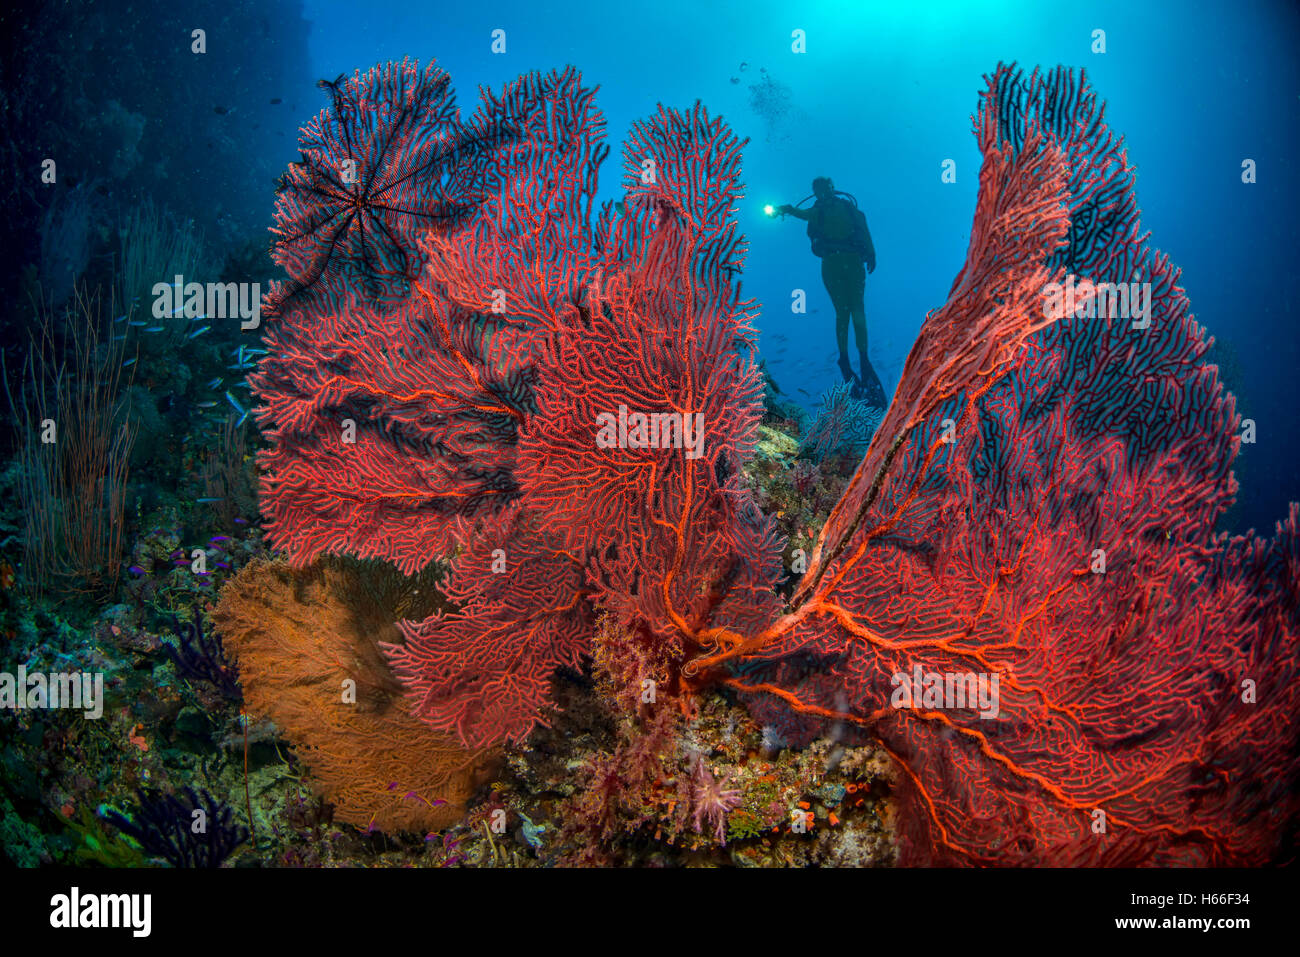 Scuba diver explores coral reef with gorgonian corals Stock Photo